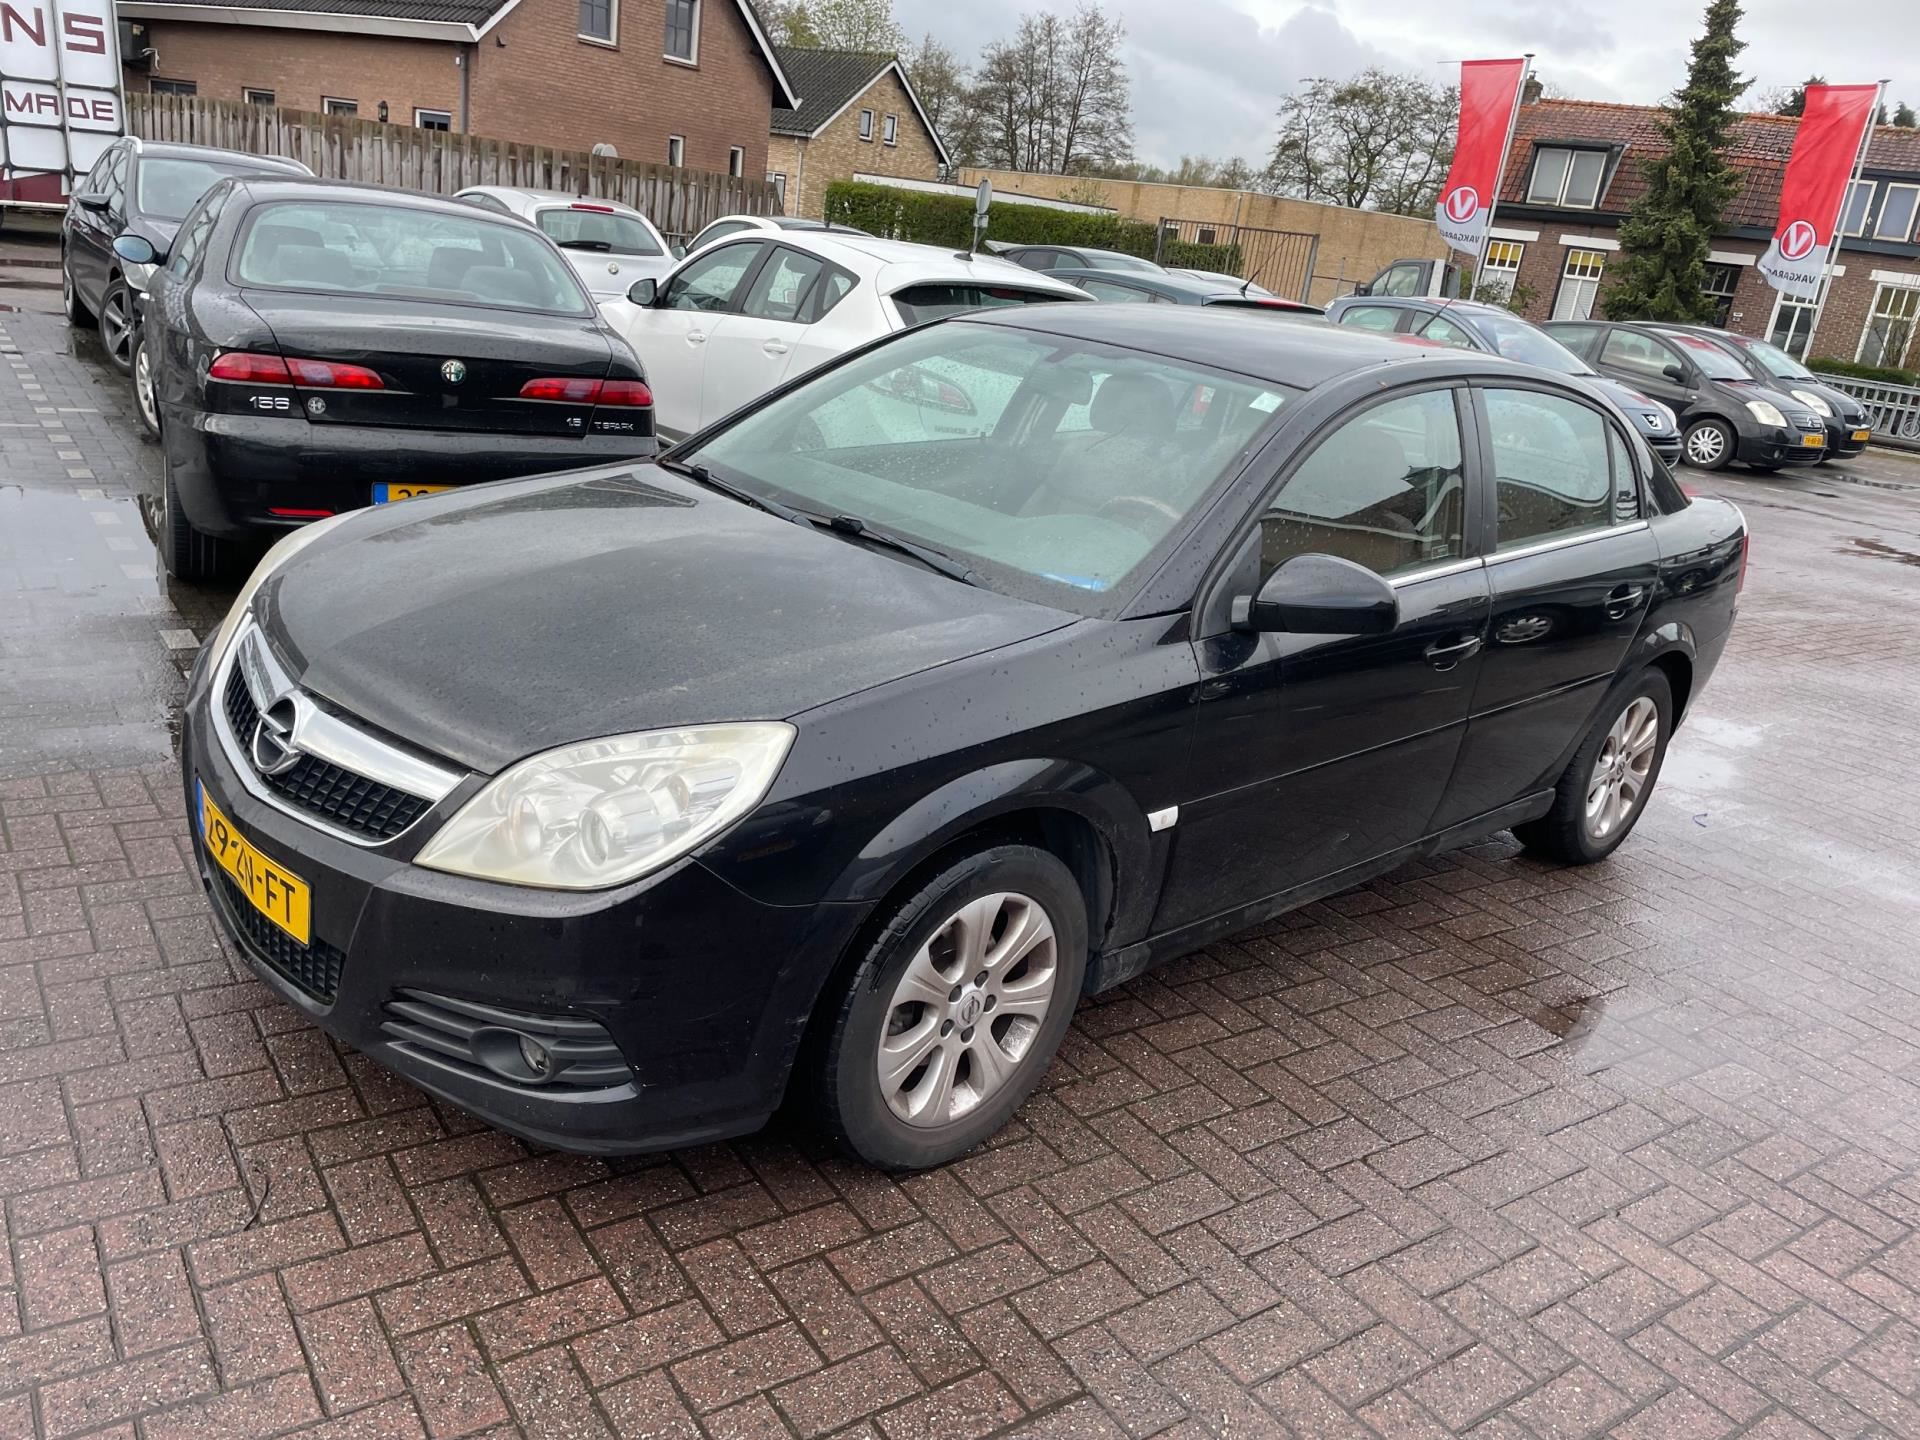 Gedachte palm tabak Opel Vectra - 1.8- 16V Business nw model Benzine uit 2008 - www.madeautos.nl